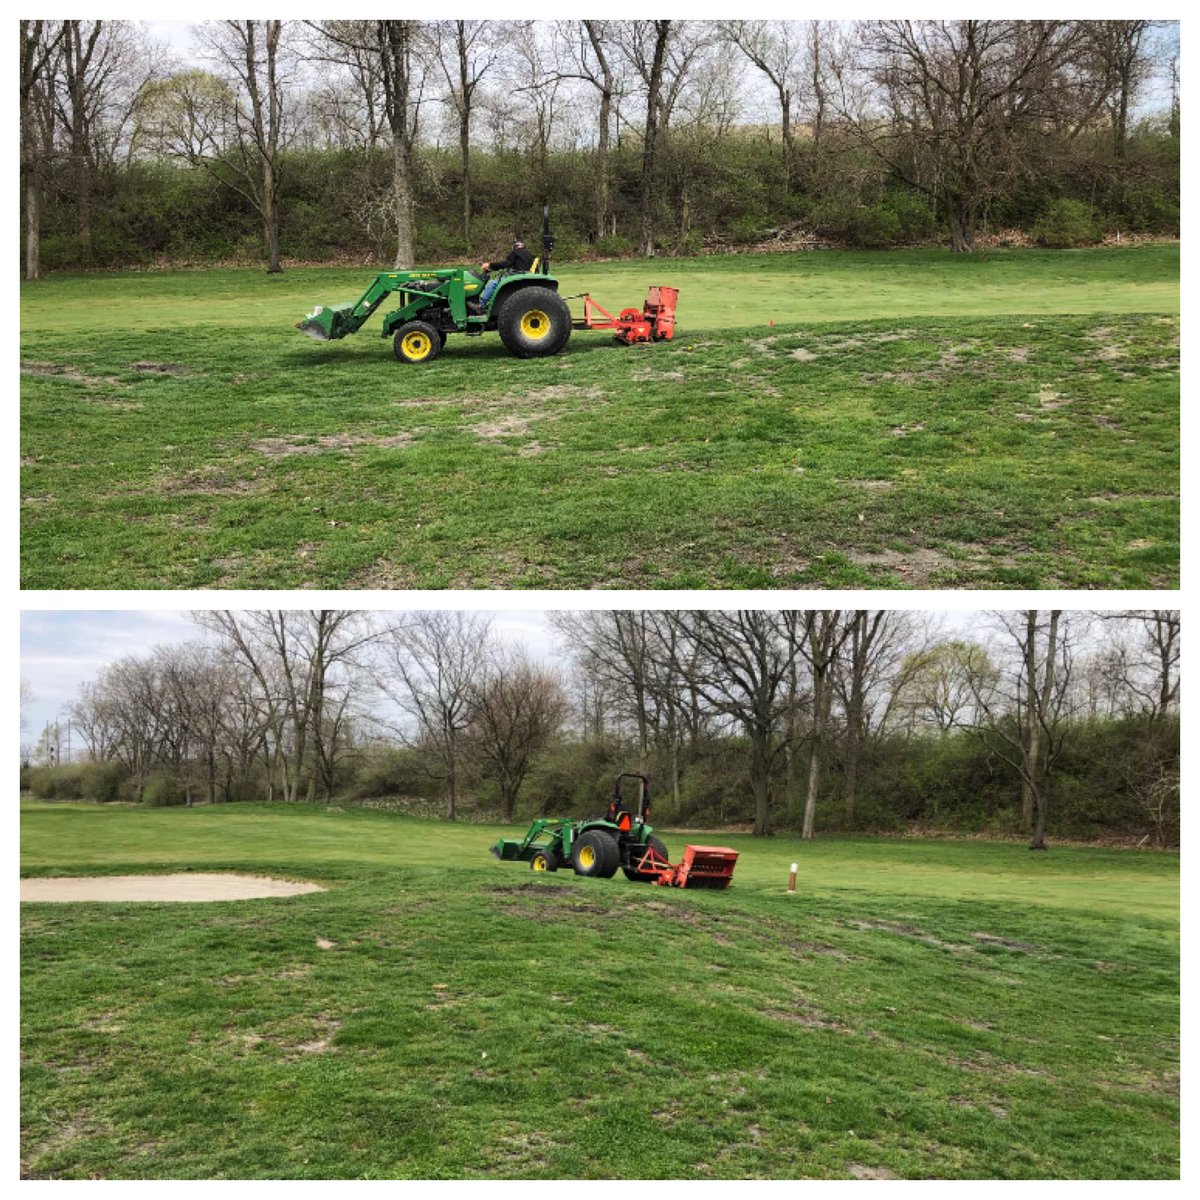 MB - Behind the Scenes. Seeding some areas of the course. #progress #playgolfanderson